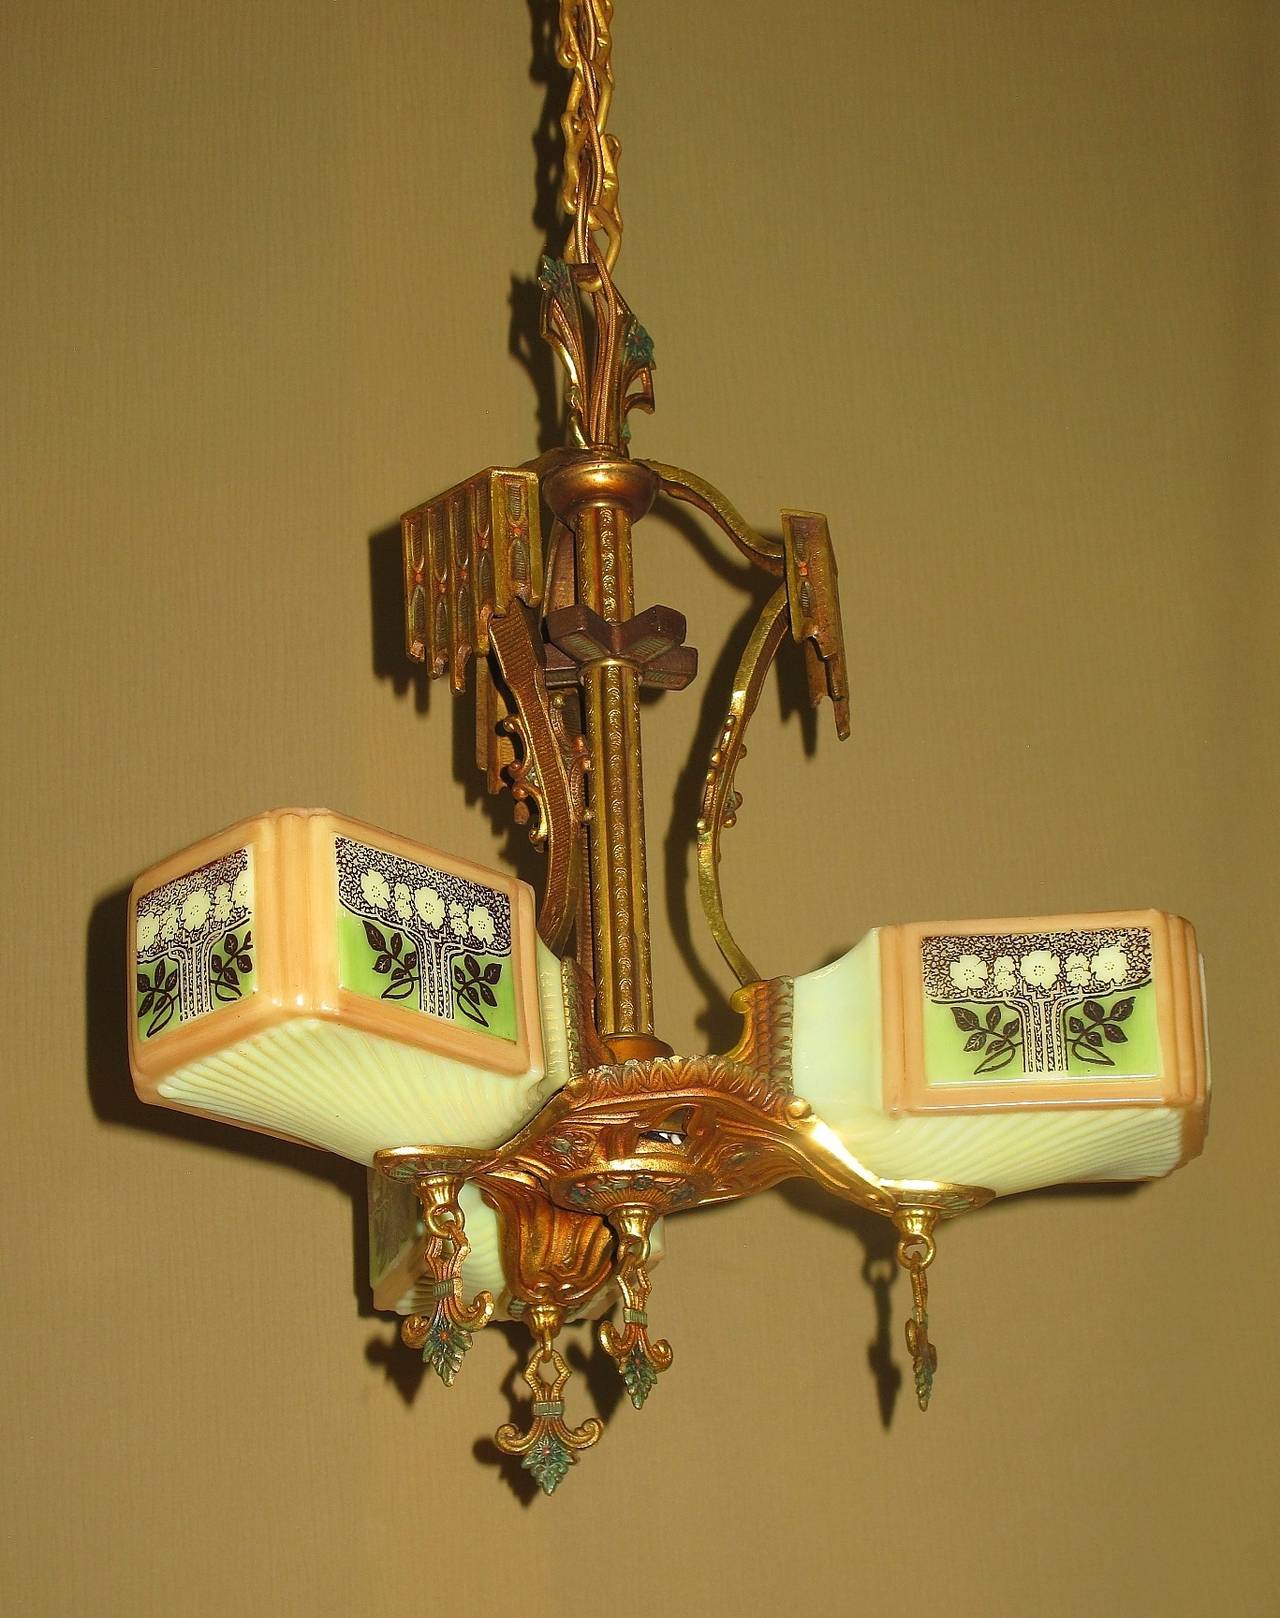 Art Deco Gill Three-Light Ceiling Fixture with Original Colors and Glass Shades, 1930